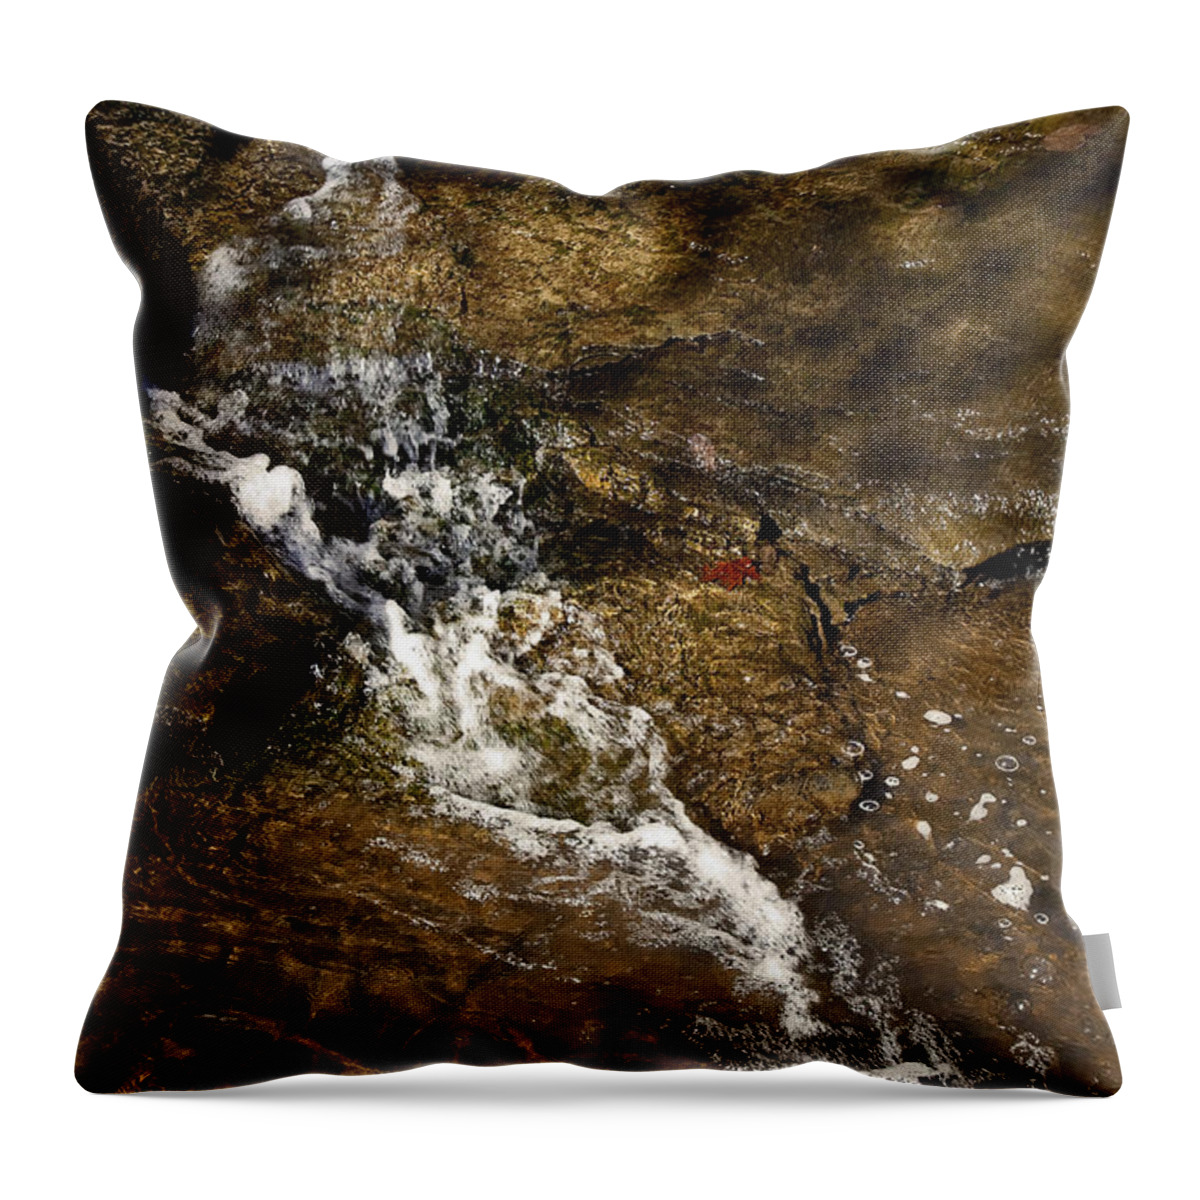 Broadwater Falls Throw Pillow featuring the photograph Fall Runoff at Broadwater Falls by Michael Dougherty